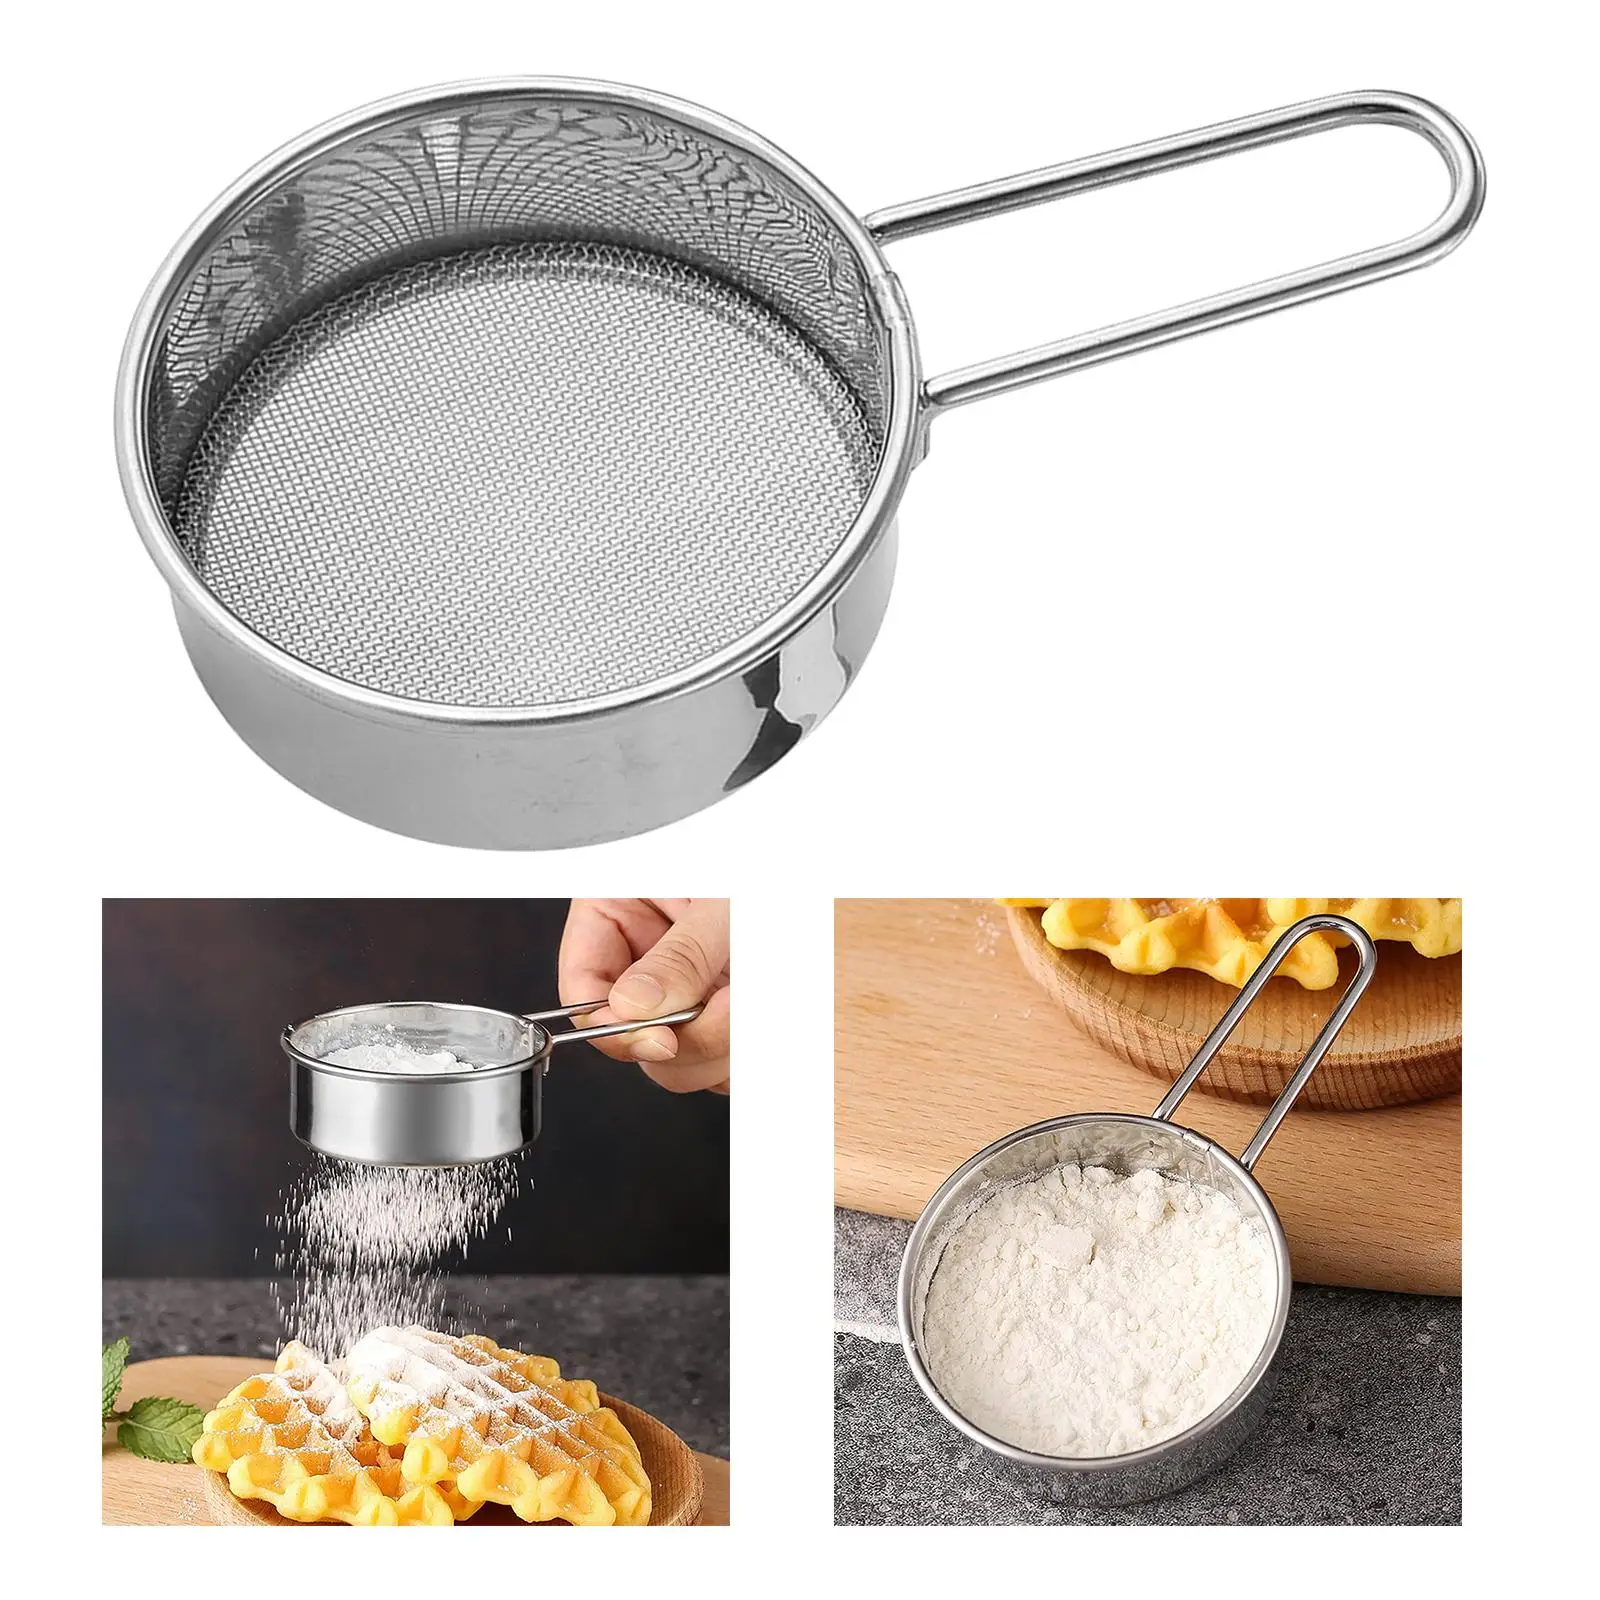 Stainless Steel Flour Sifter Multipurpose with Handles Mini Kitchen Accessories Kitchen Oil Strainer for Spices Baking Sugar